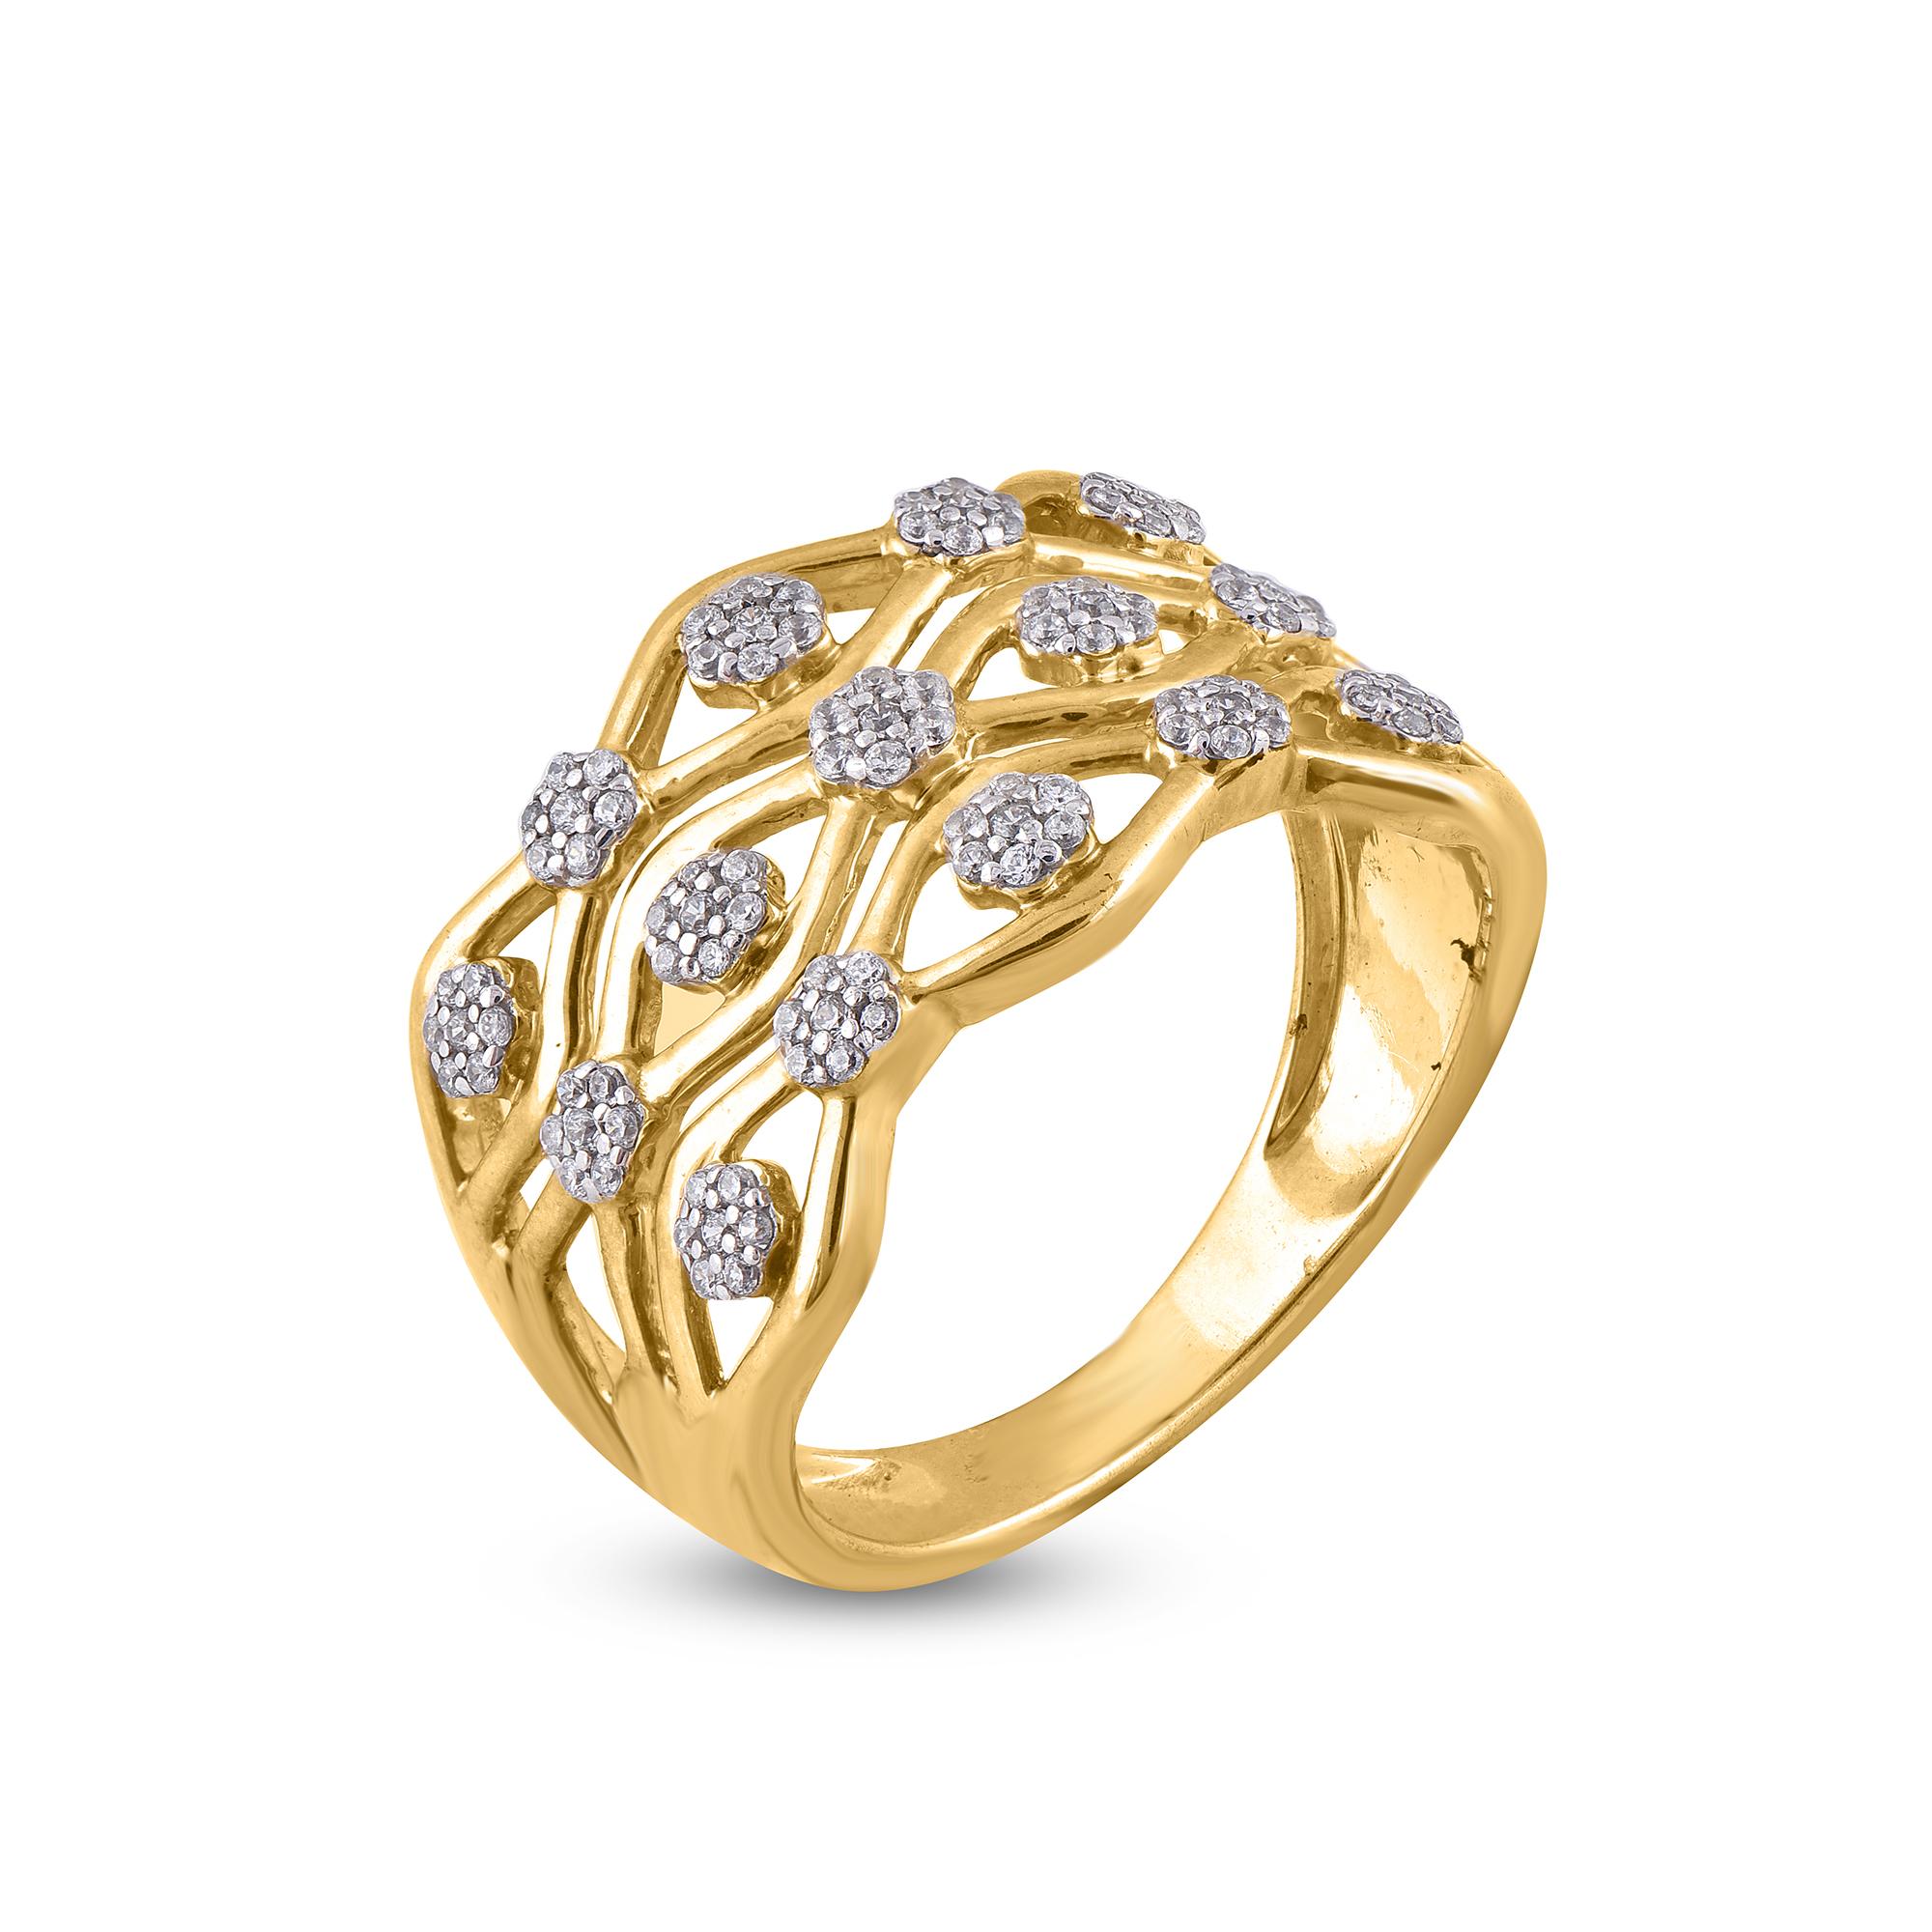 Truly exquisite, she'll admire the effortless look of this graceful diamond wave ring. The ring is crafted from 14-karat gold in your choice of white, rose, or yellow, and features 105 round diamond set in Prong and shine in H-I color I2 clarity and